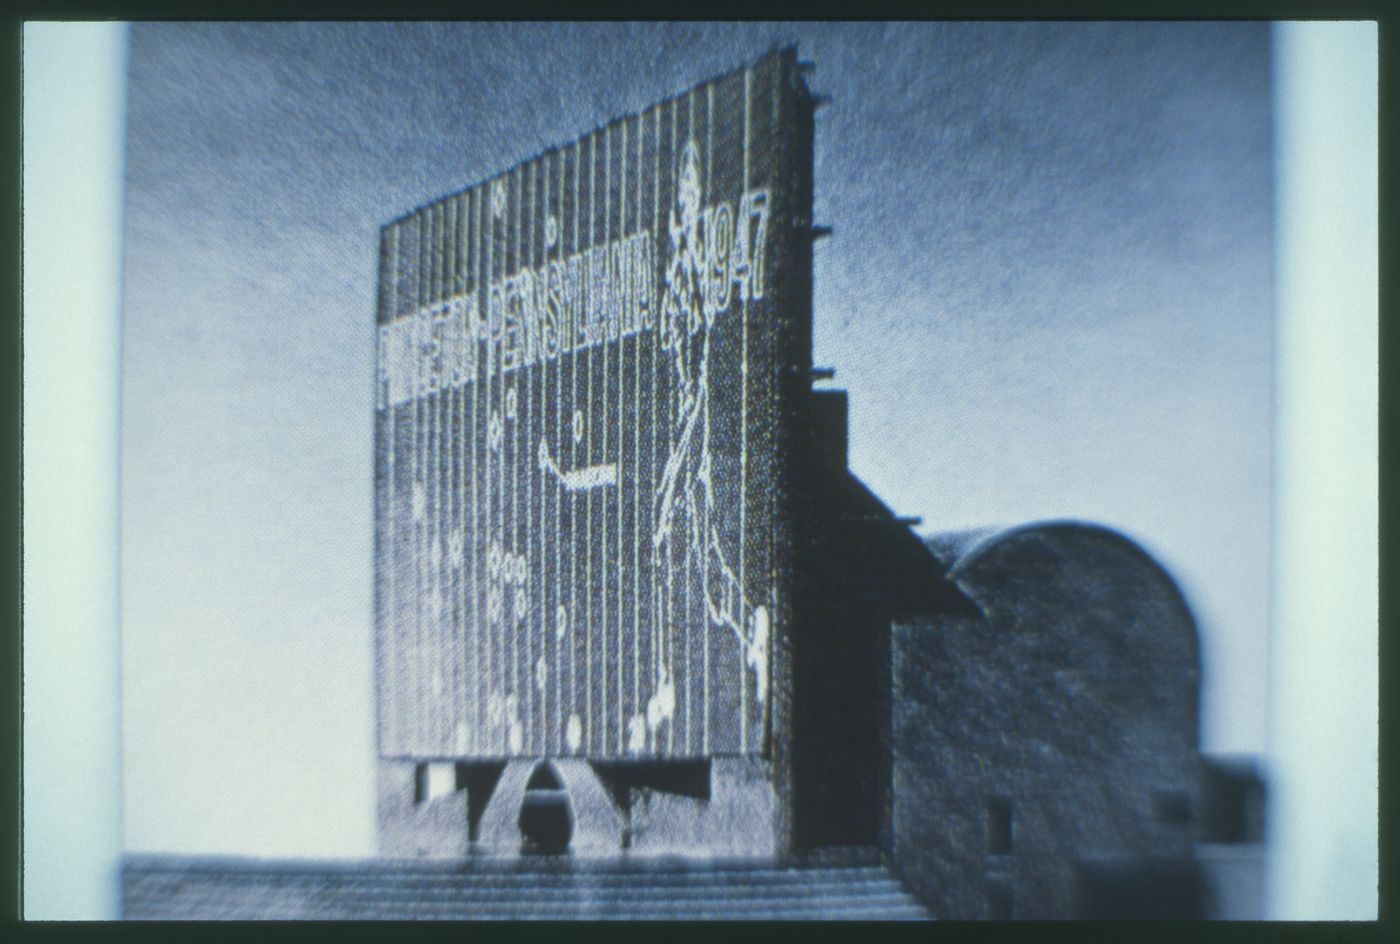 Slide of a view of an unidentified structure